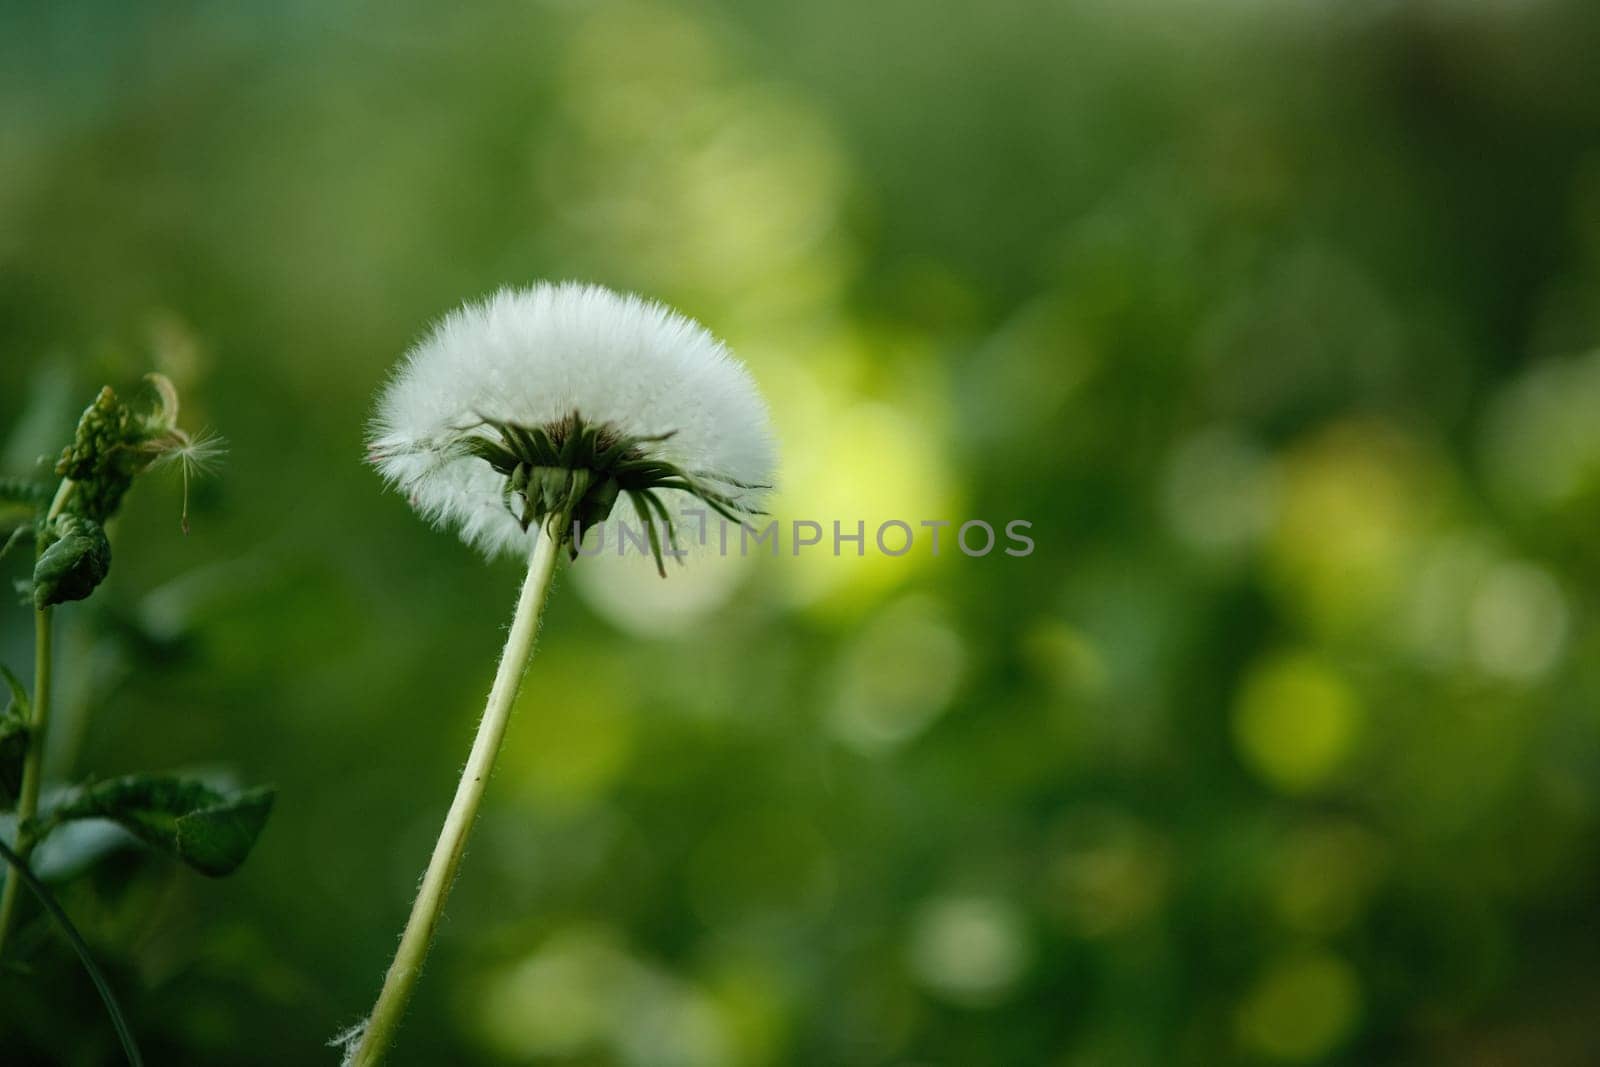 Close-up of a dandelion stem against a blurred green background. Lonely dandelion in the garden. Thick fluffy dandelion.